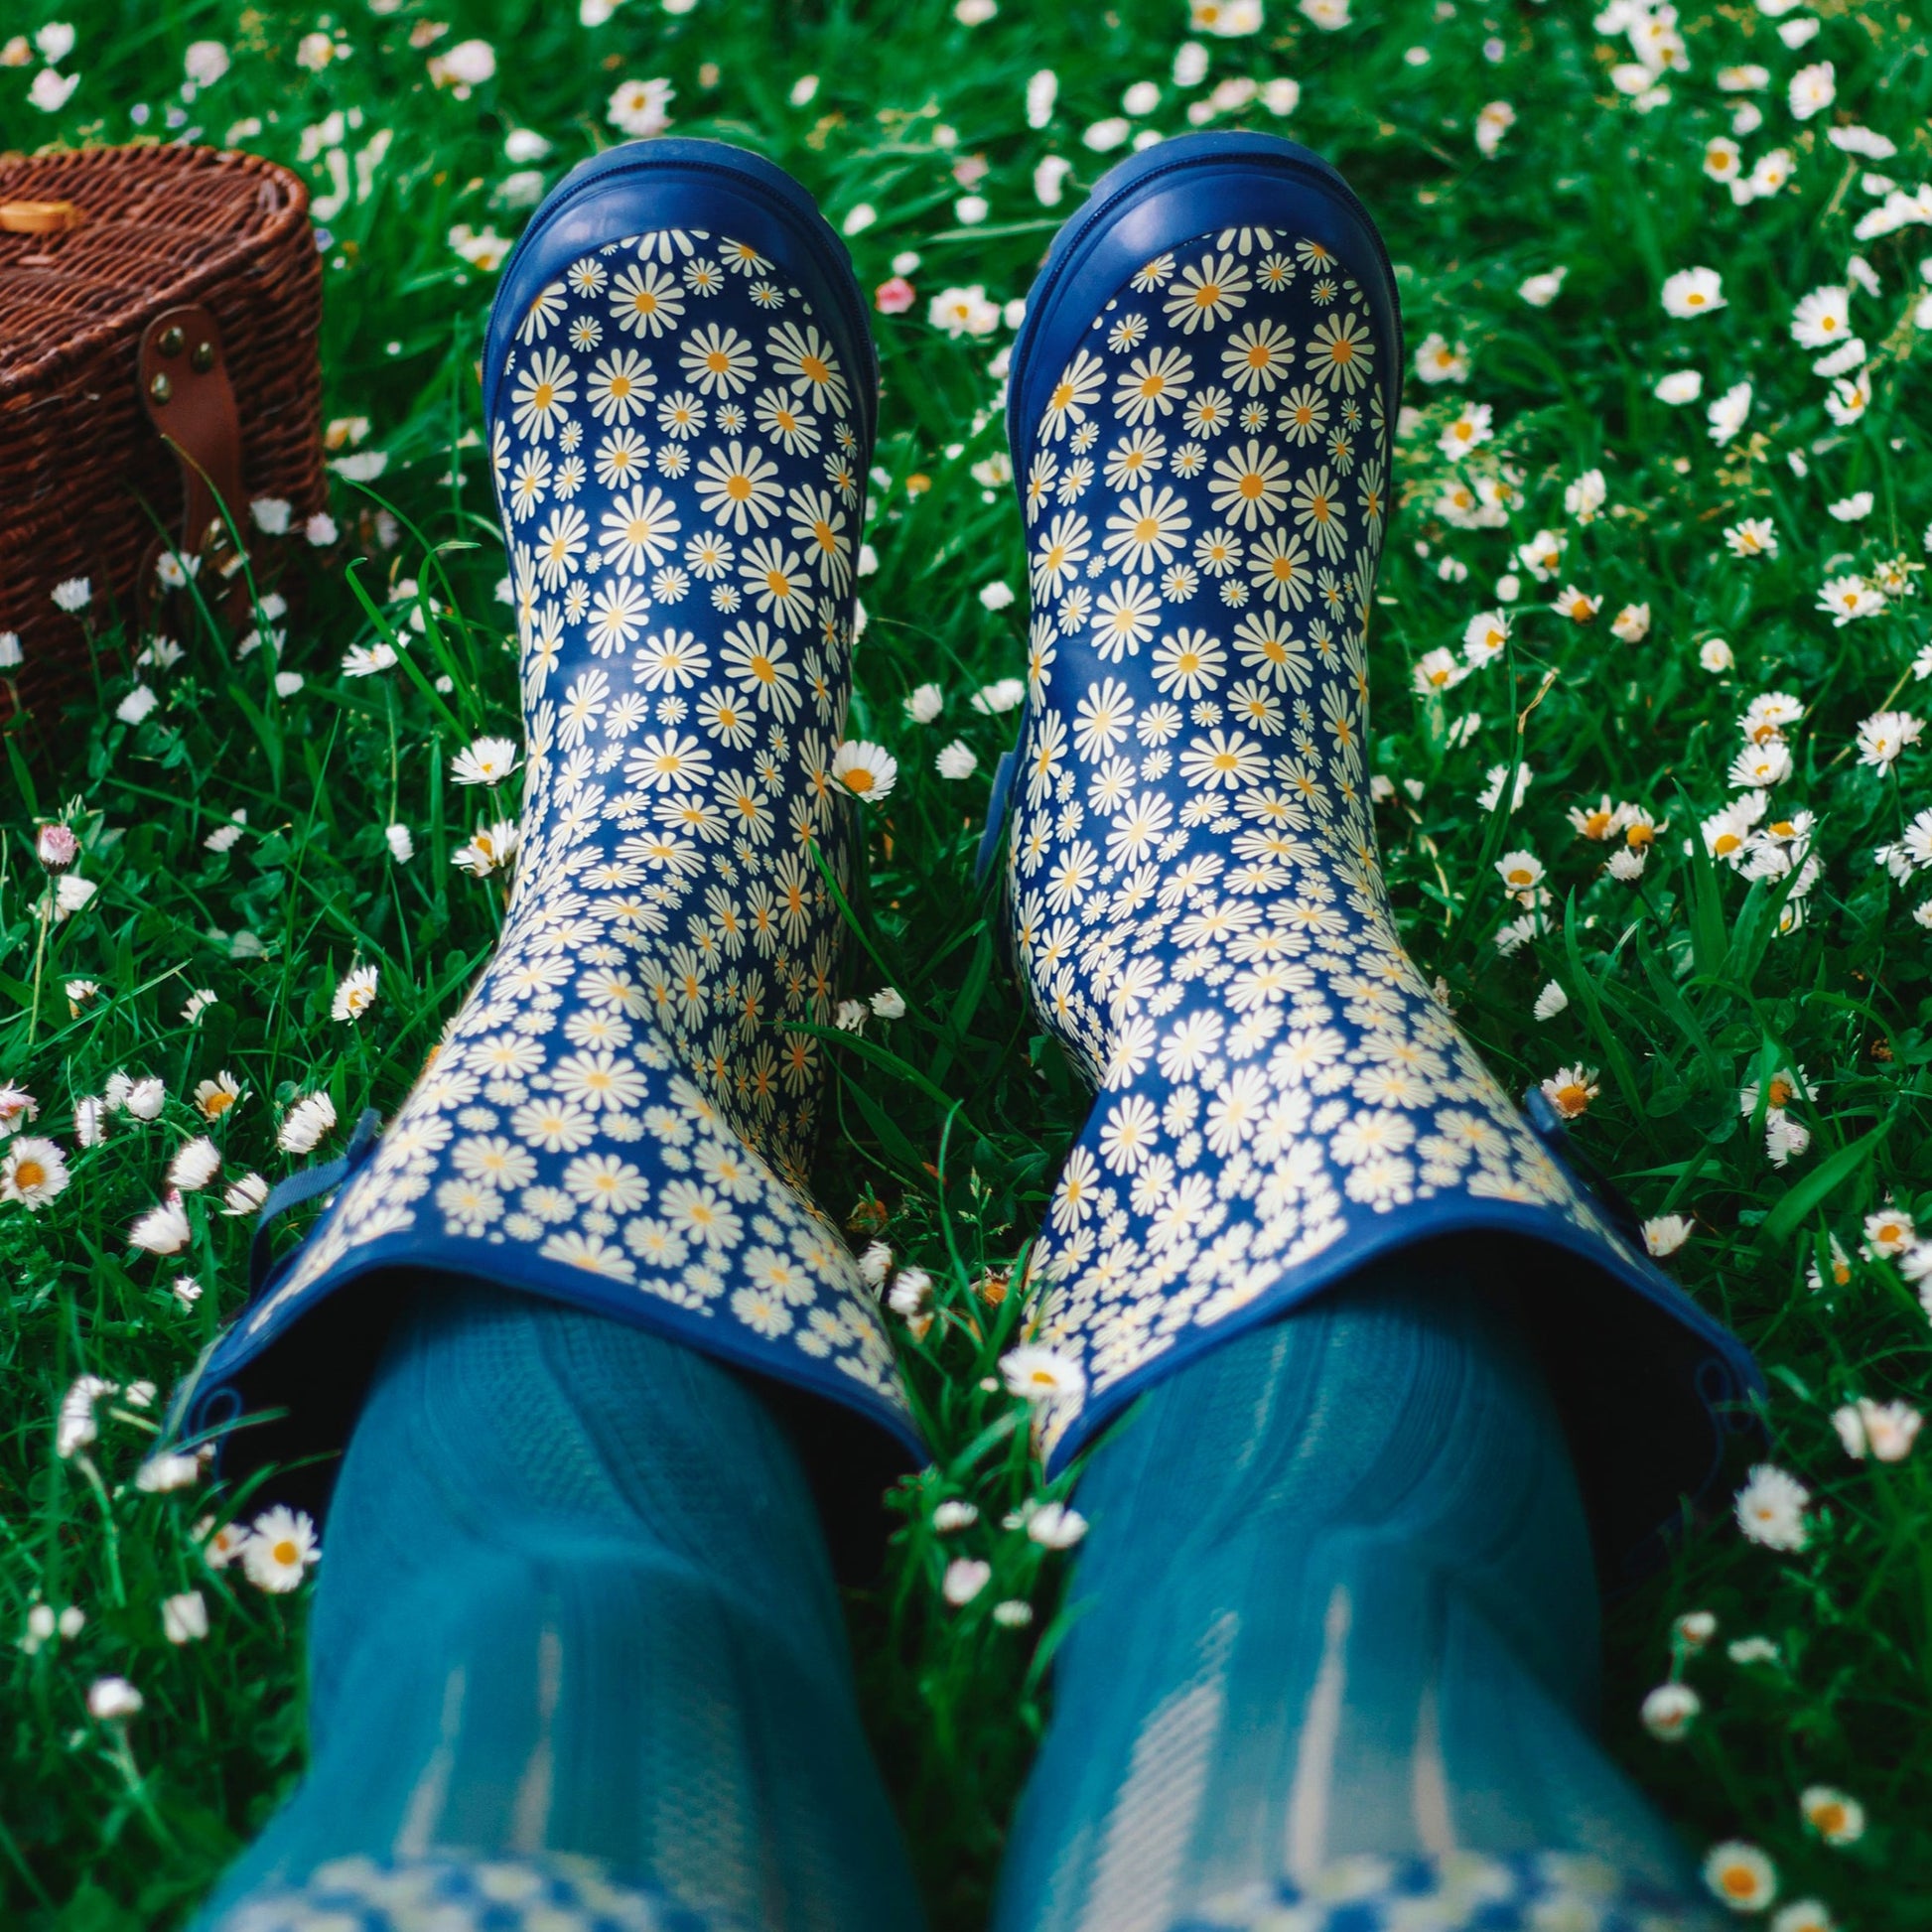 daisy wellies in use whilst laying on grass and daisies